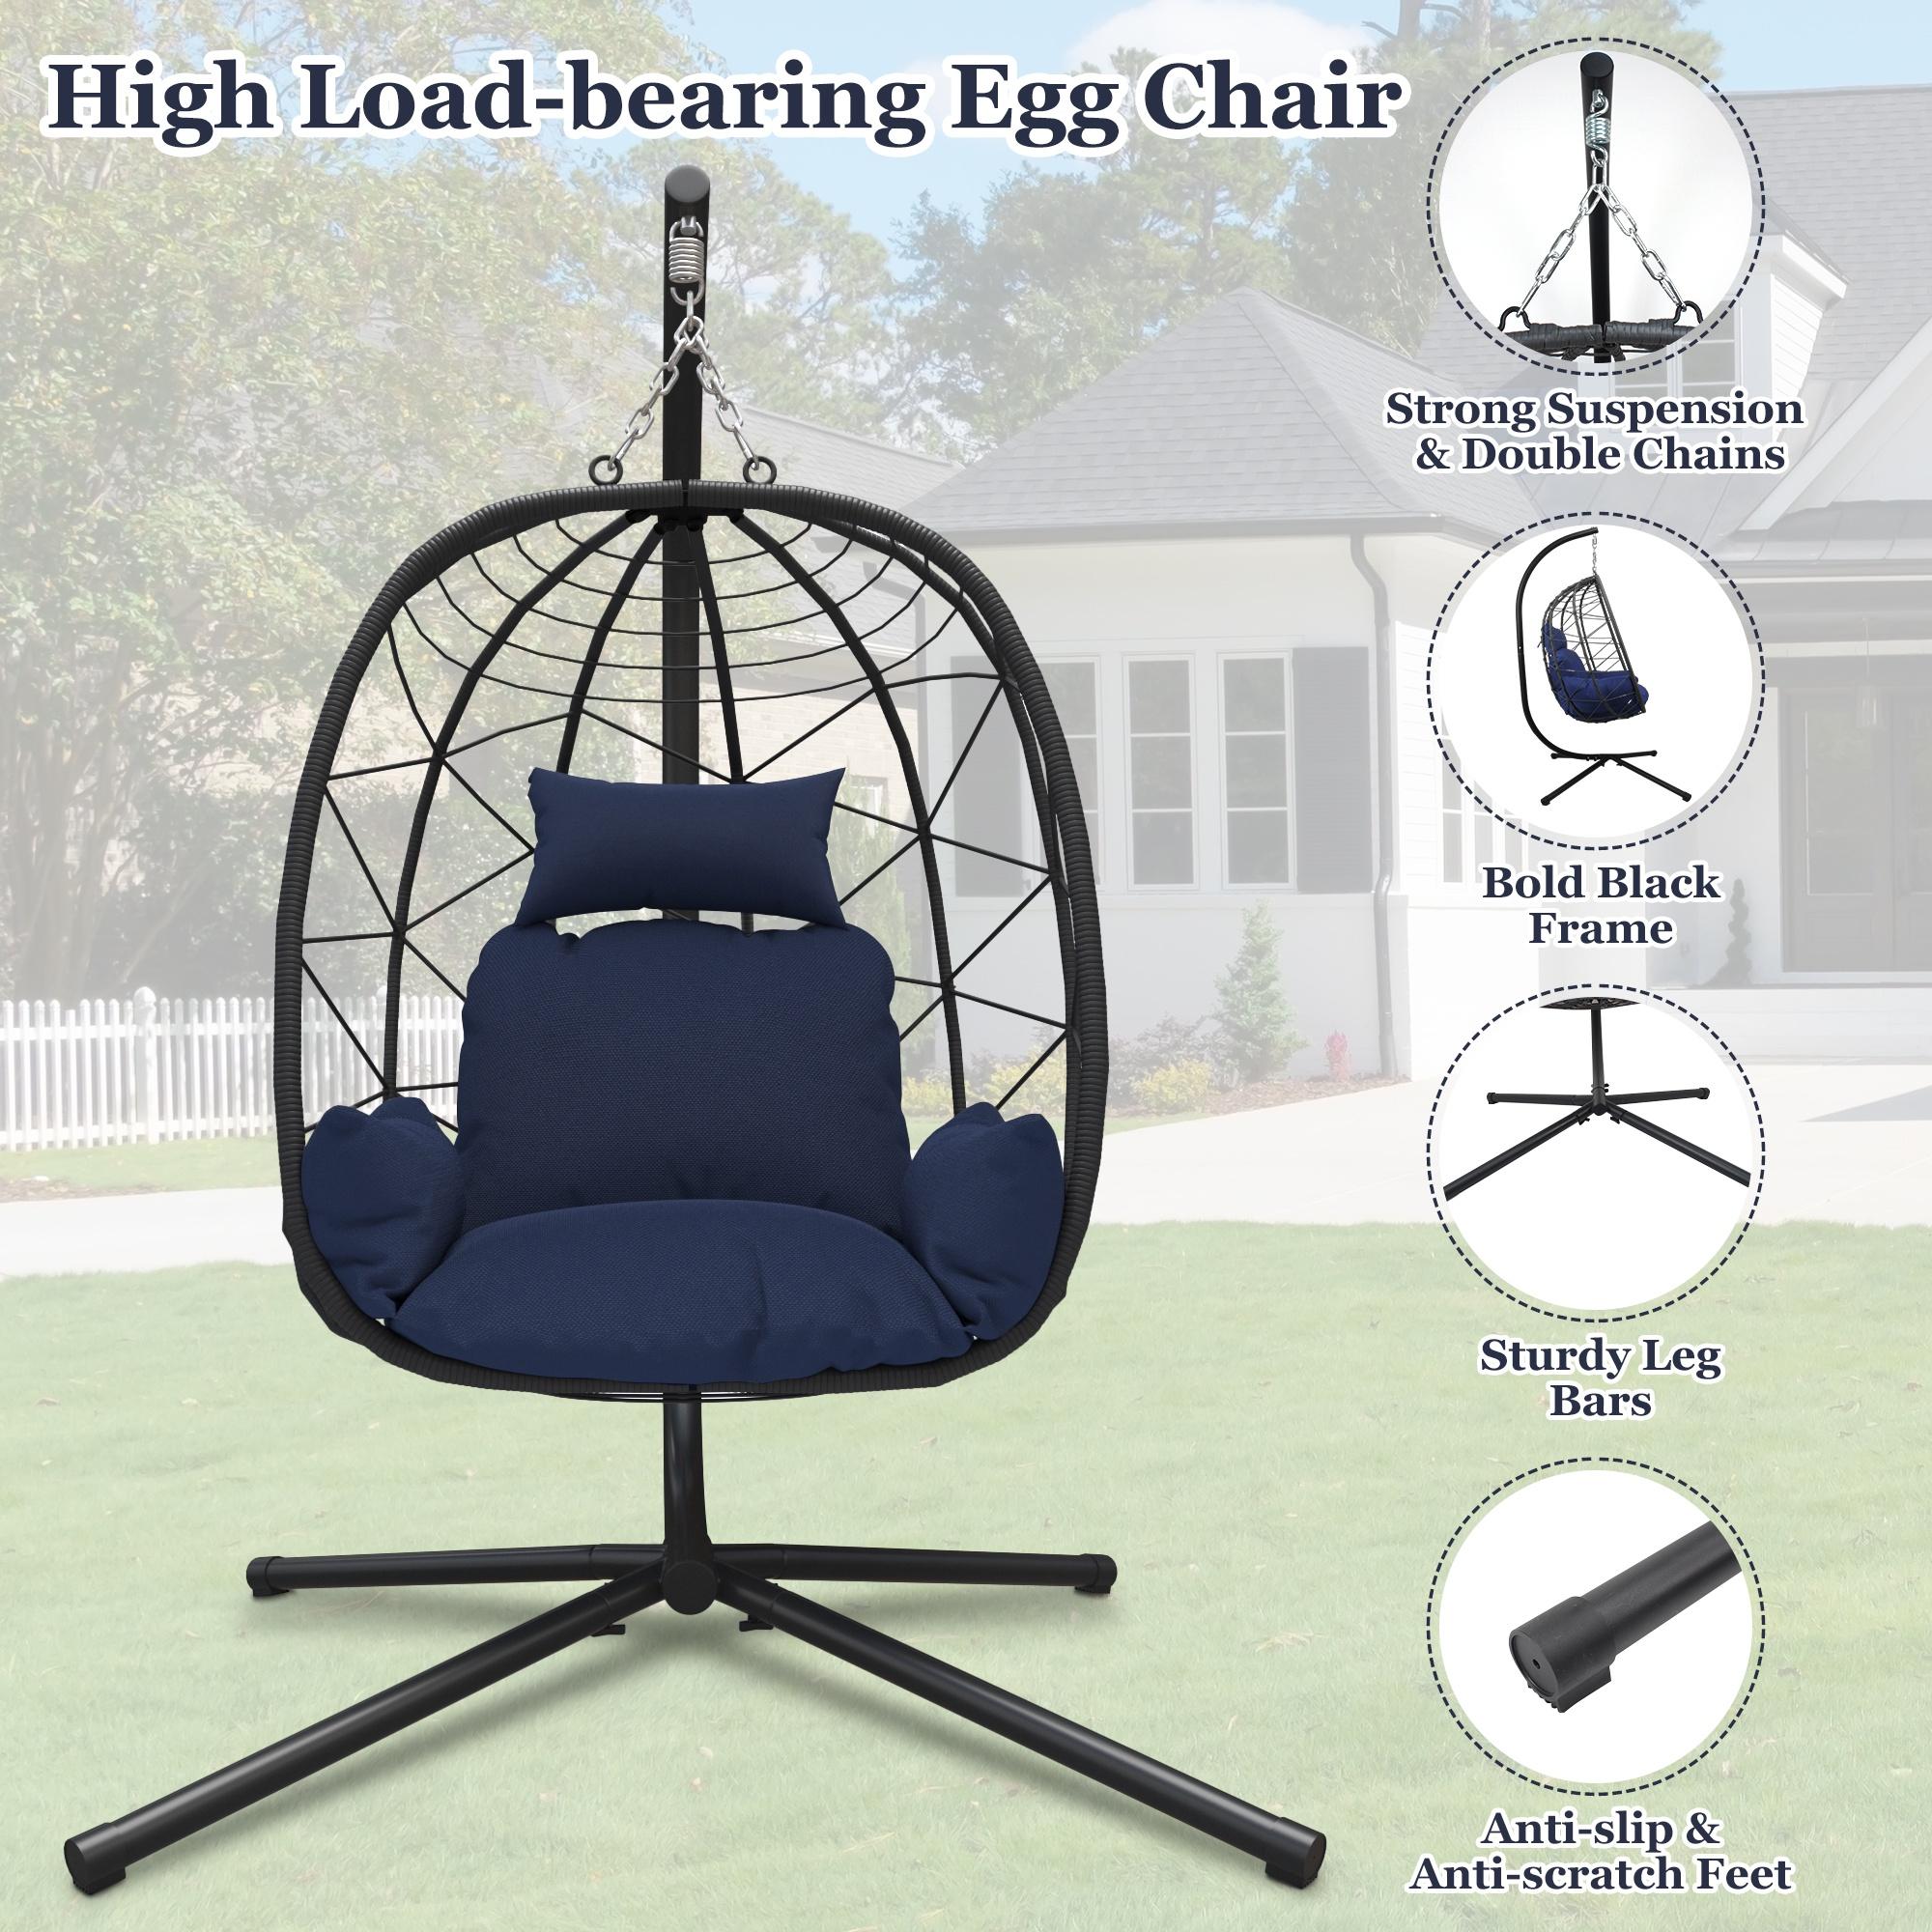 Egg Chair with Stand, Patio Wicker Hanging Chair, Egg Chair Hammock Chair with UV Resistant Cushion and Pillow for Indoor Outdoor, Patio Backyard Balcony Lounge Rattan Swing Chair, JA2832 - image 2 of 9